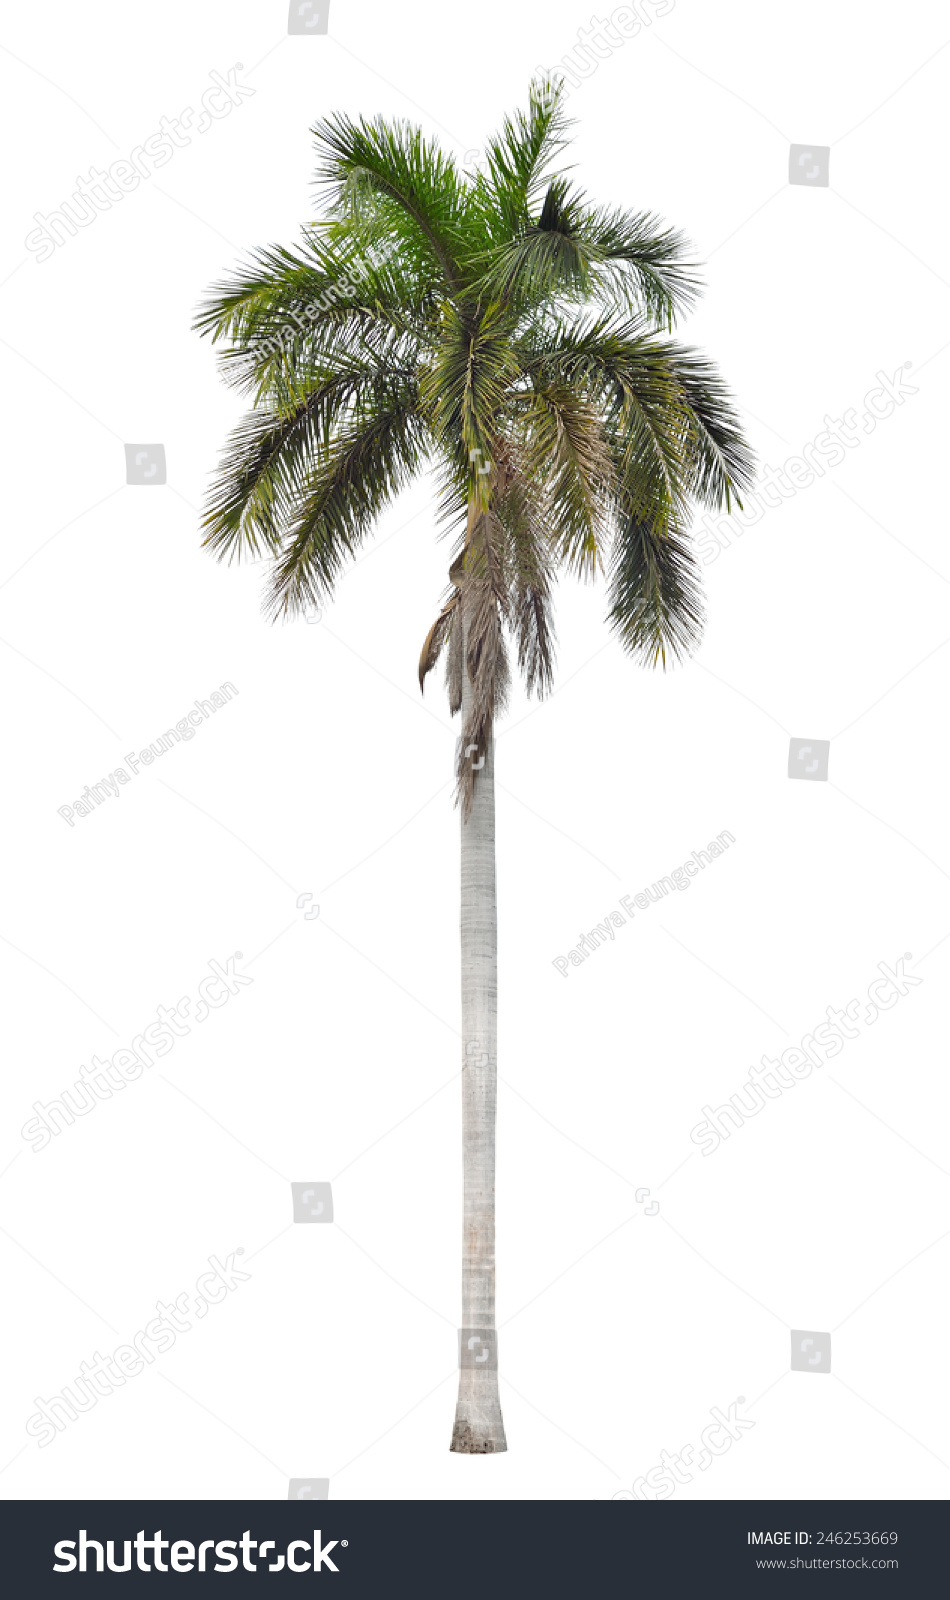 Royal Palm Shed Leaves Isolated Stock Photo 246253669 Shutterstock